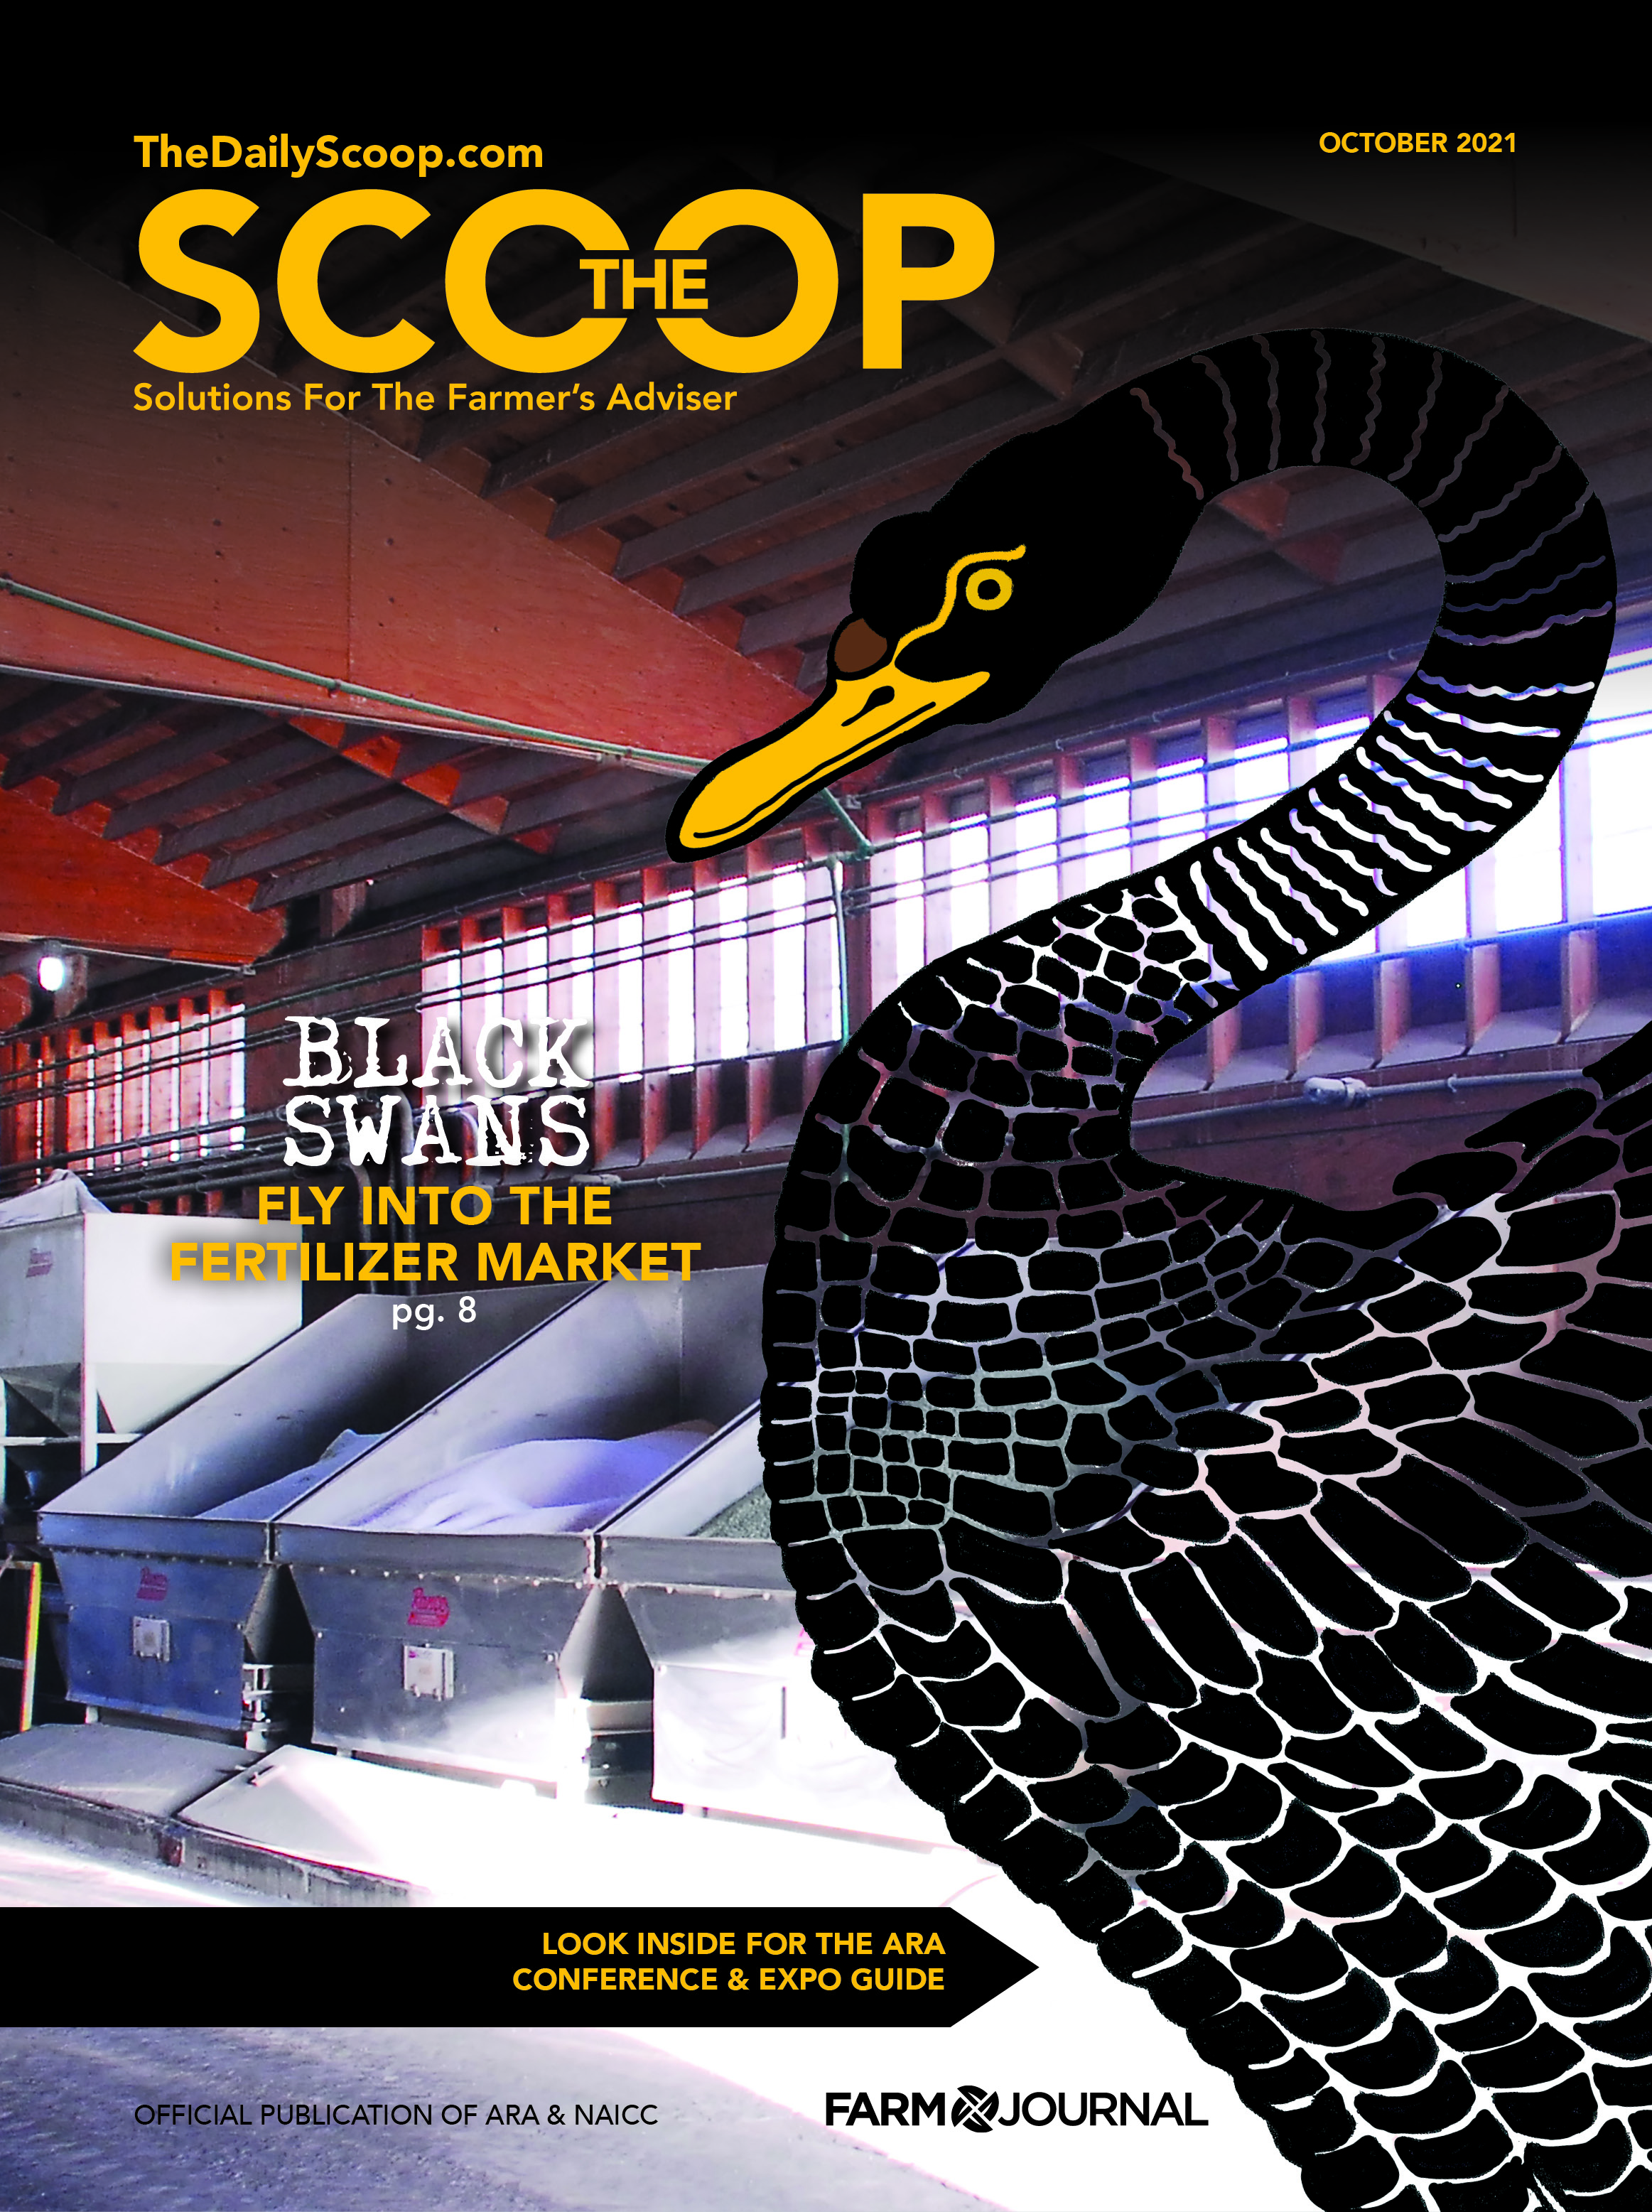  The Scoop October 2021 Cover 